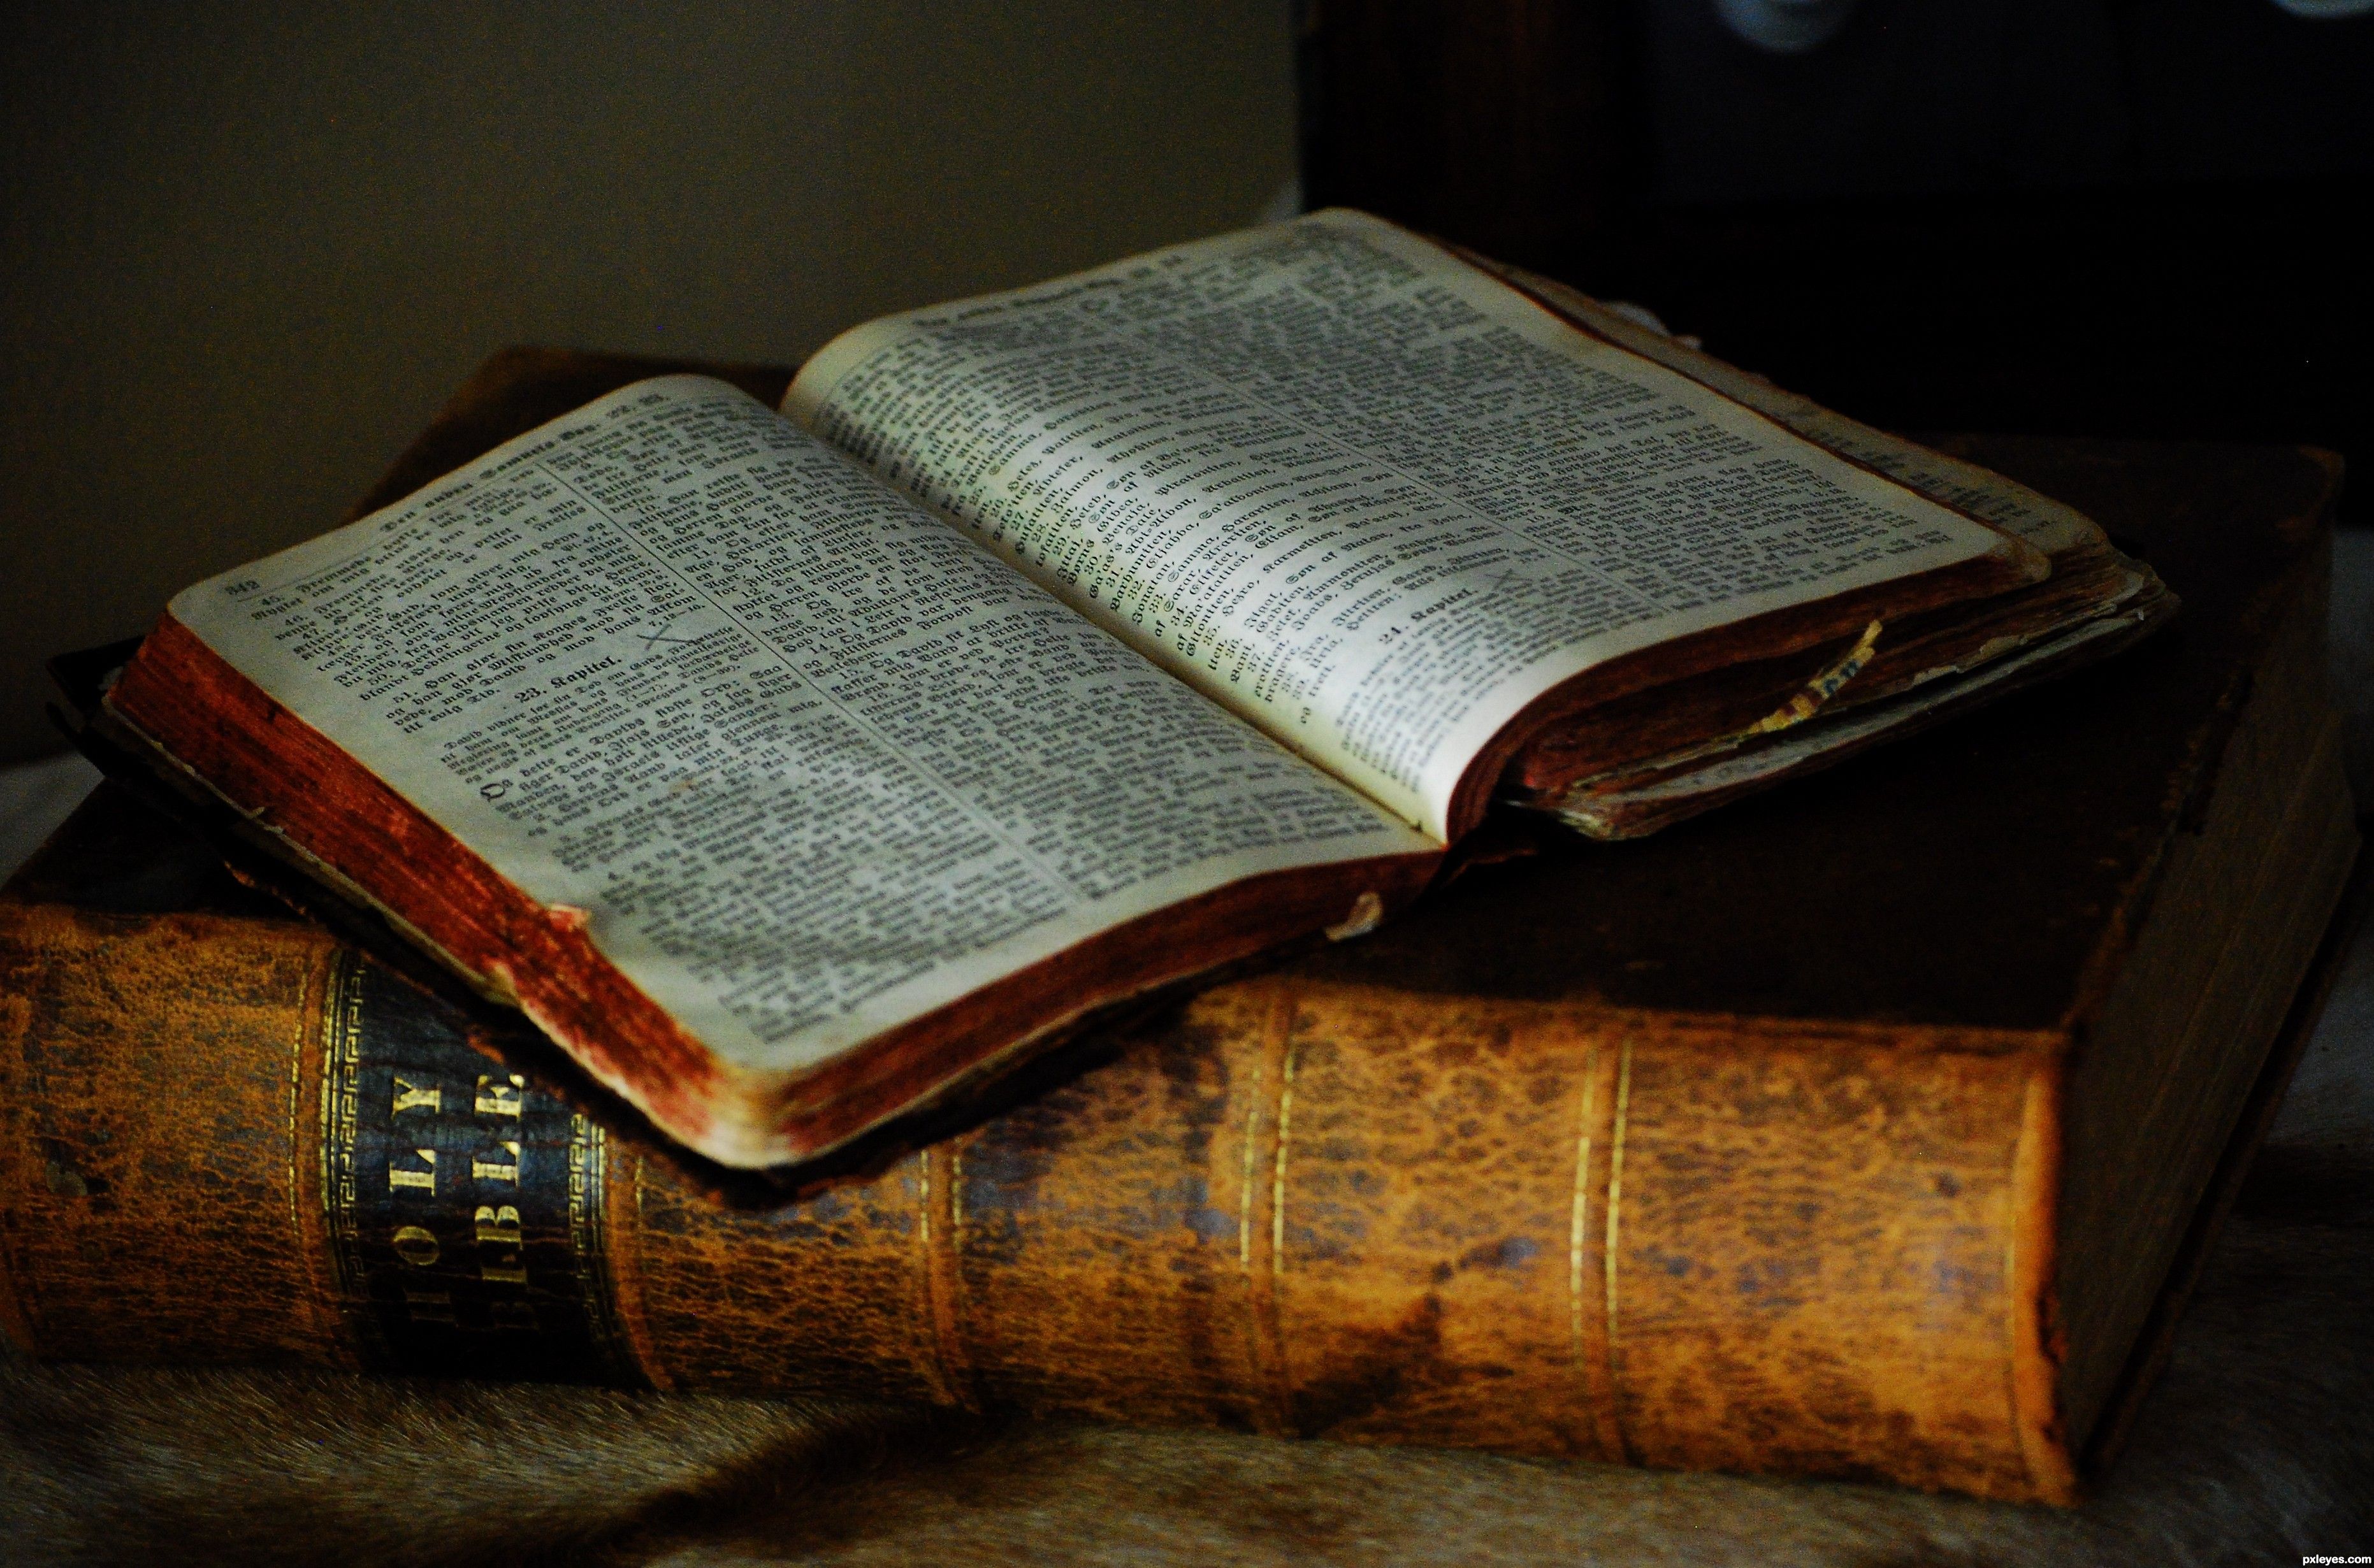 old bibles - Google Search | God Words | Pinterest | Bible and Books